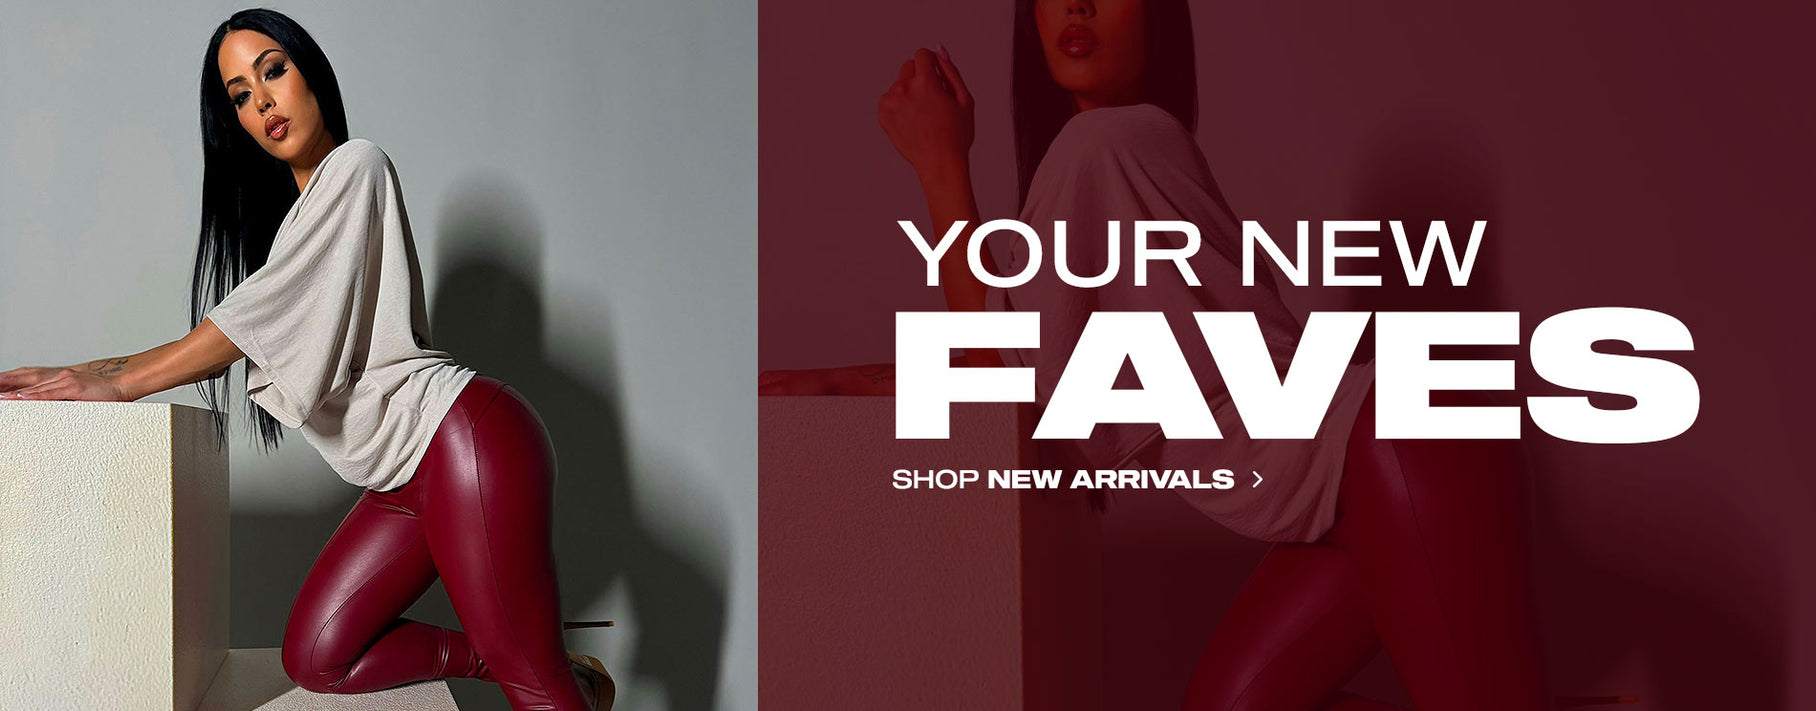 Your New Faves: Shop New Arrivals